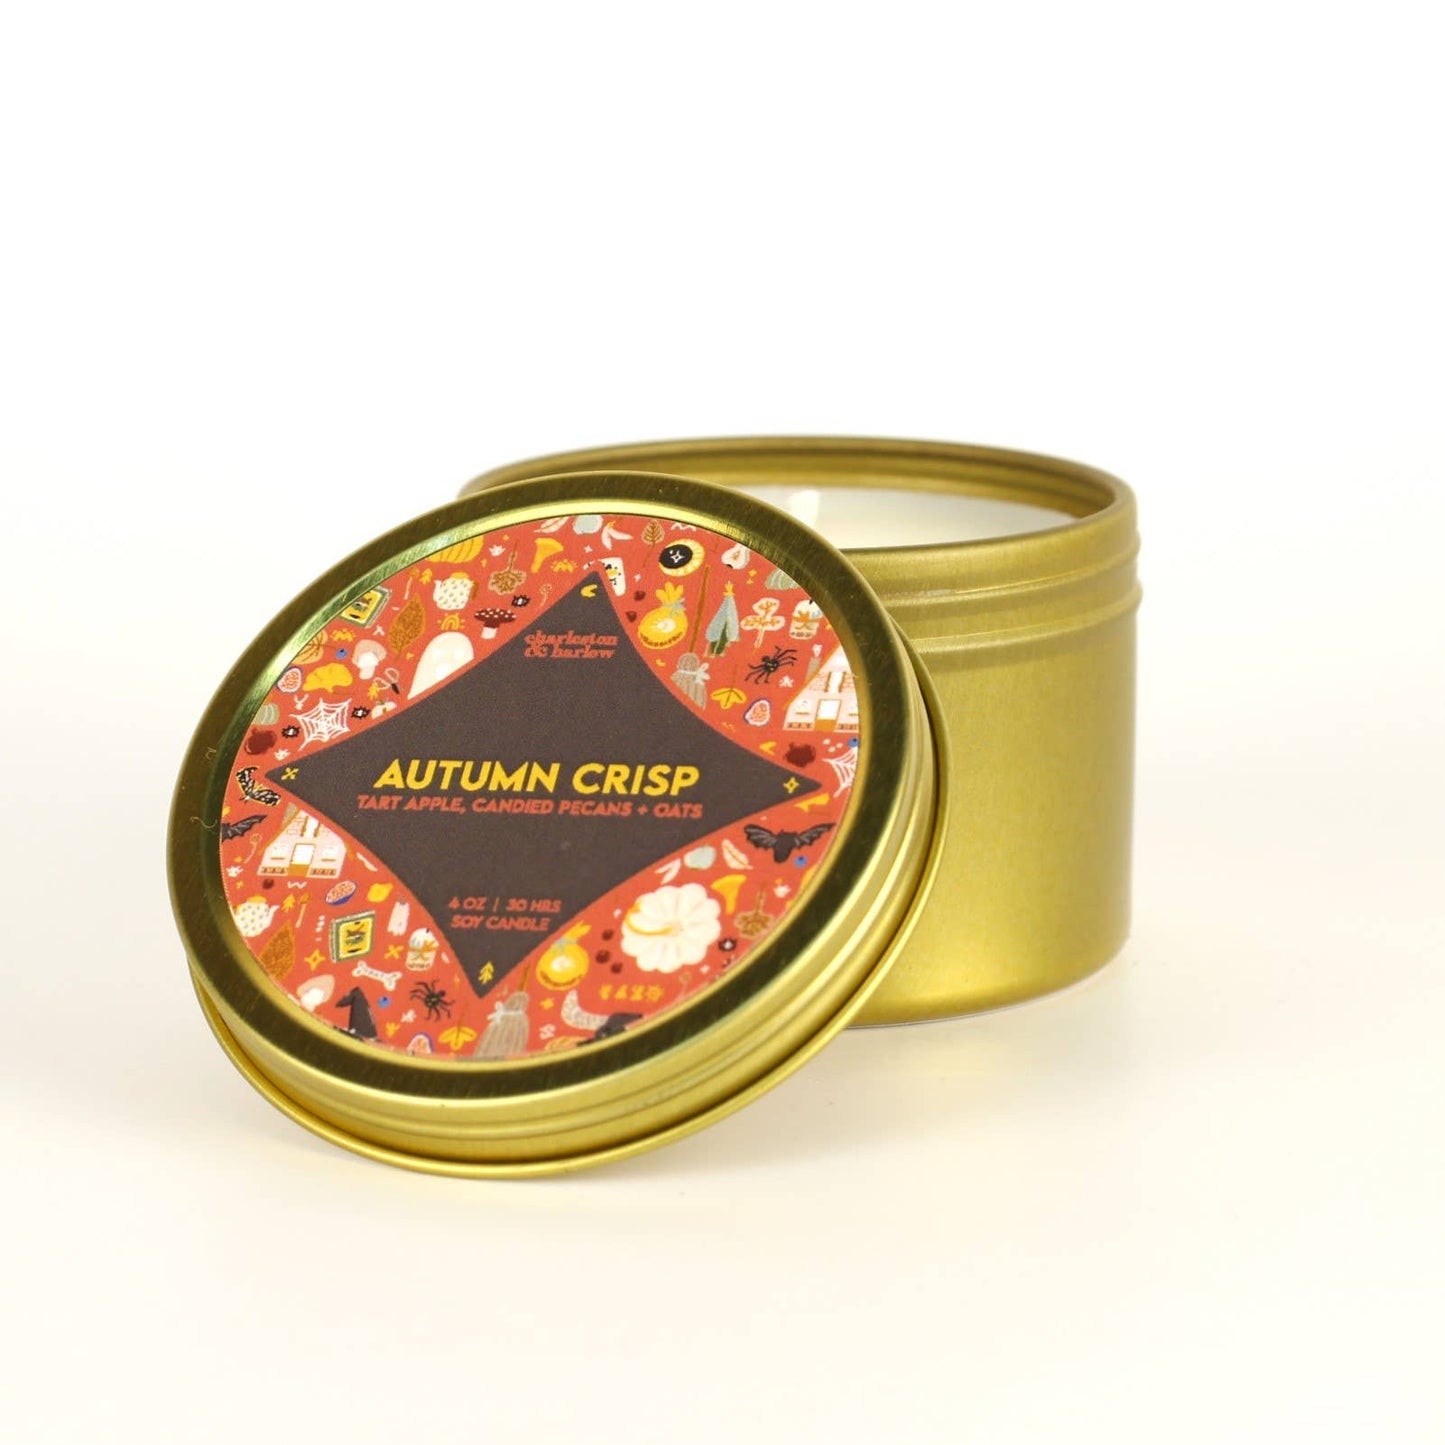 Charleston & Harlow Candle Co. - Autumn Crisp - Apple, Candied Pecan + Oats 4oz FALL Candle